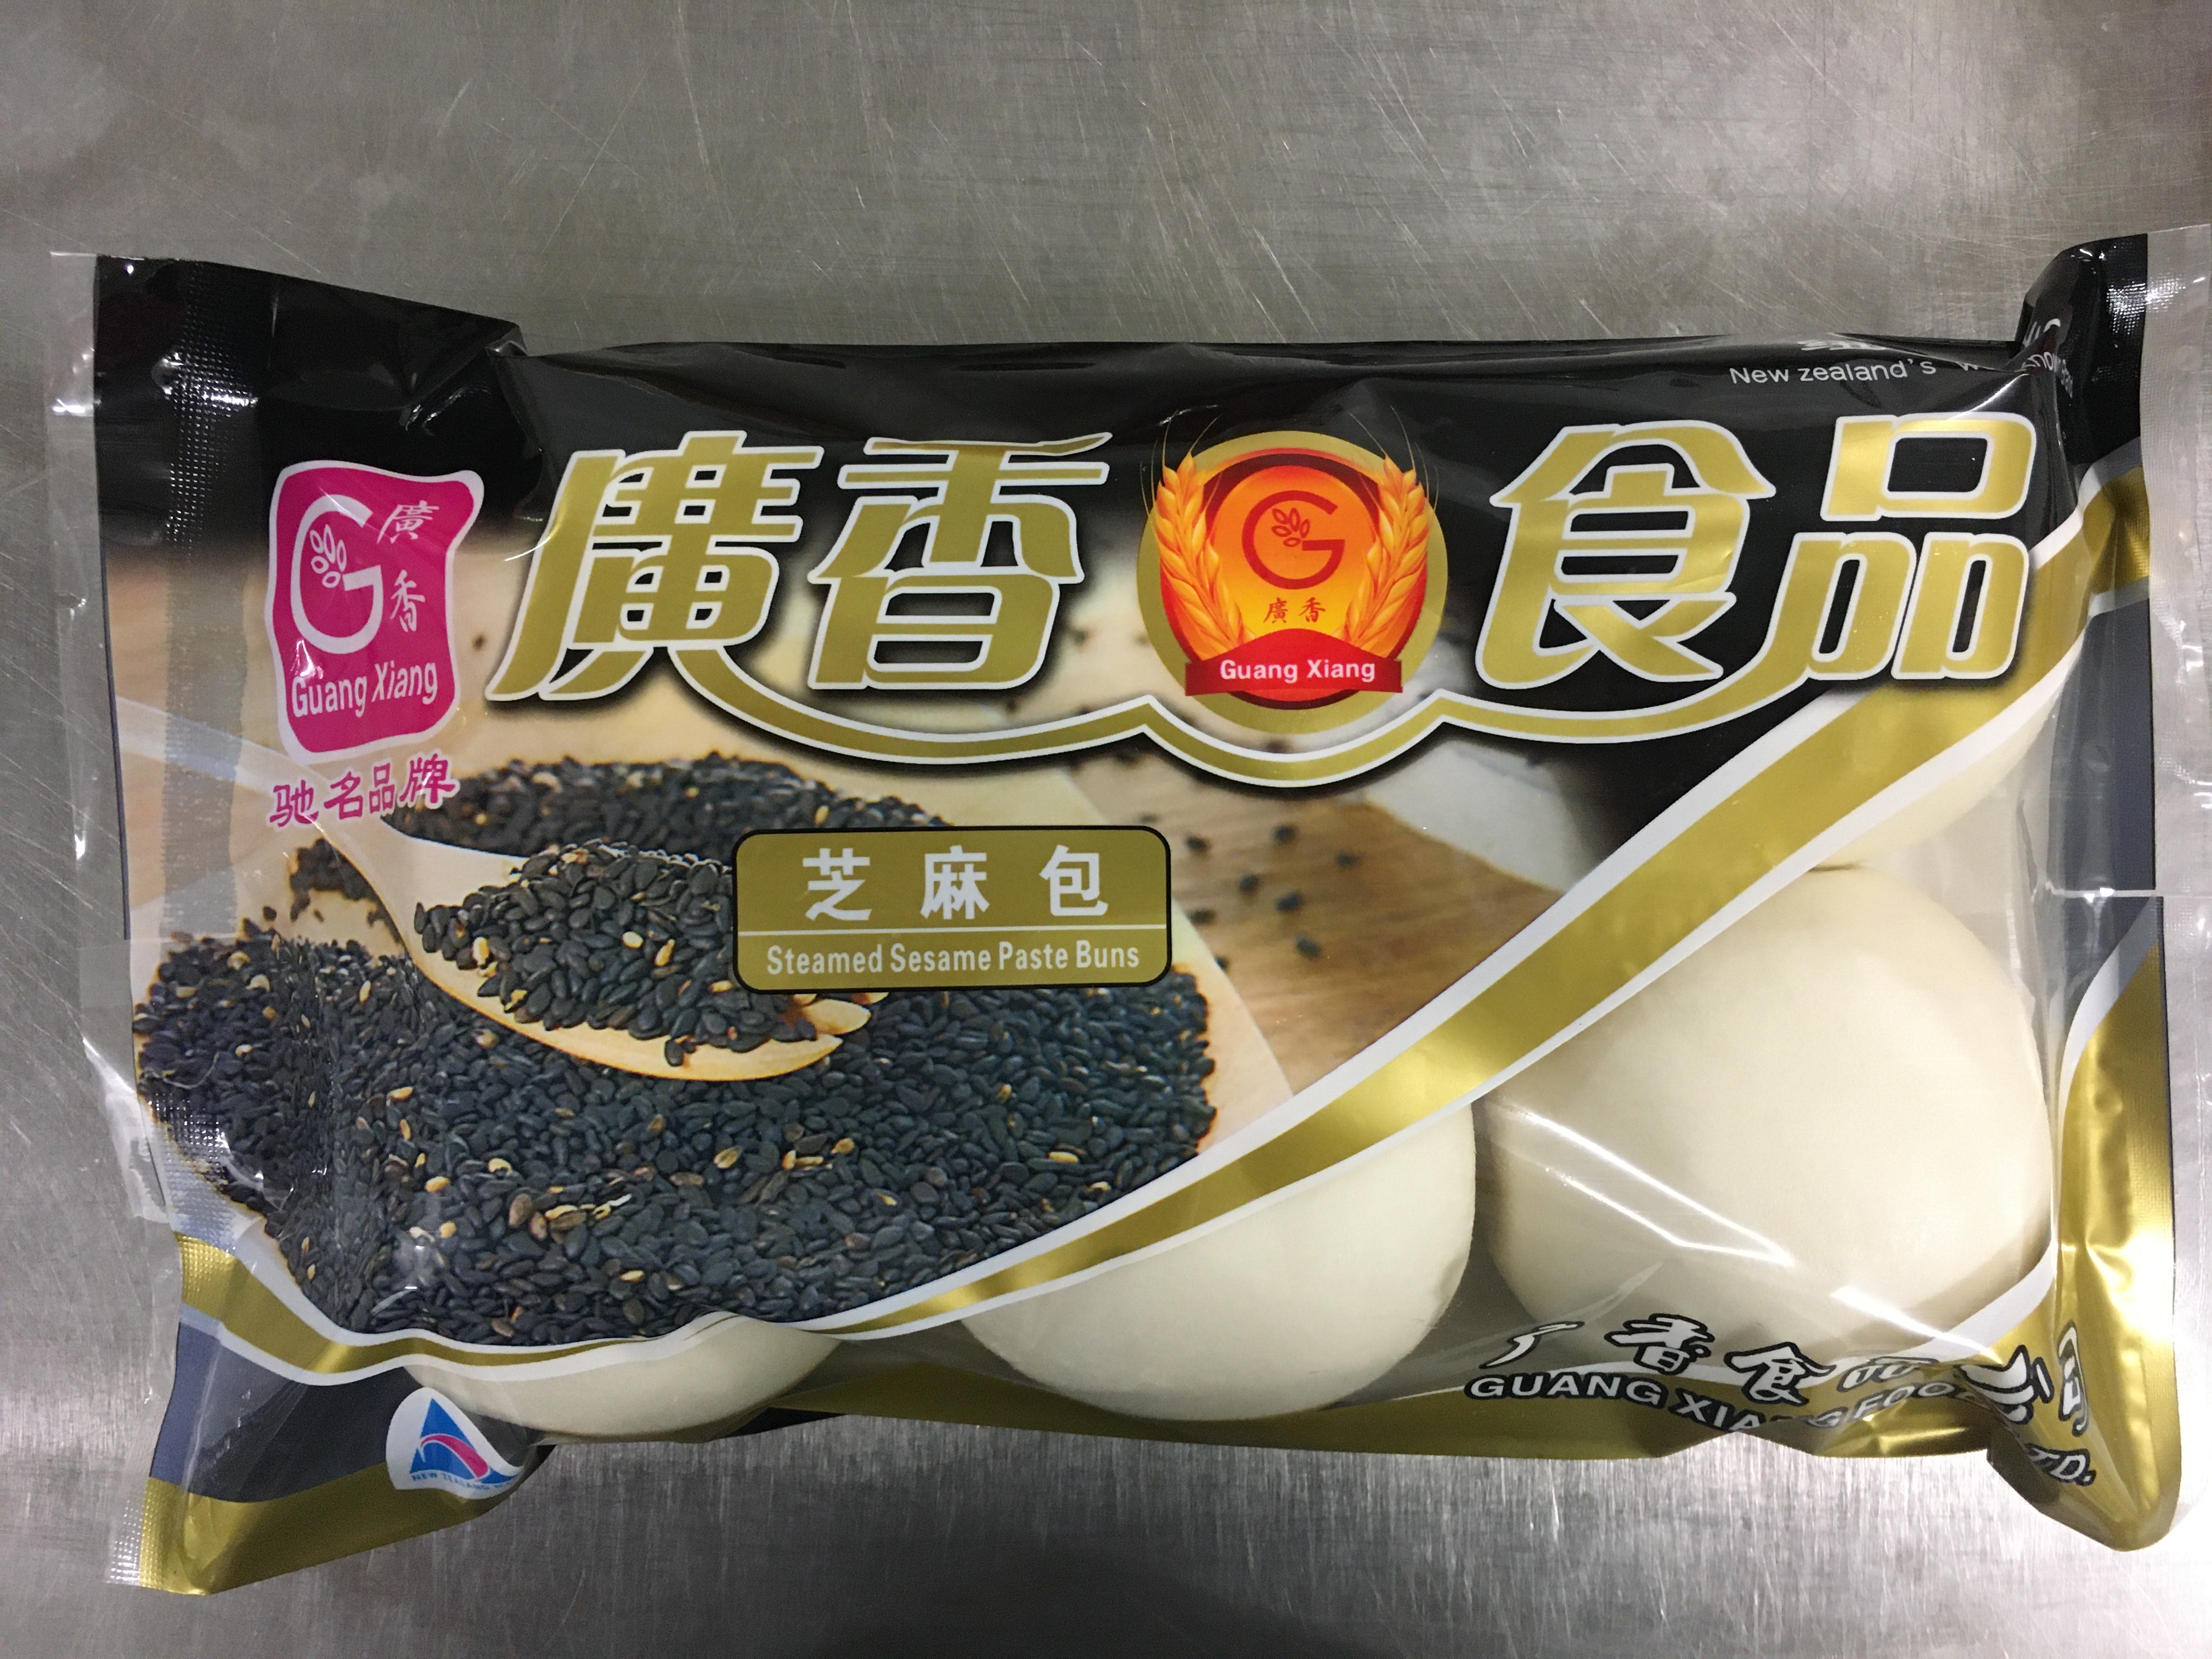 Image of Guangxiang brand Steamed Sesame Paste Buns (522g) in a plasti pack